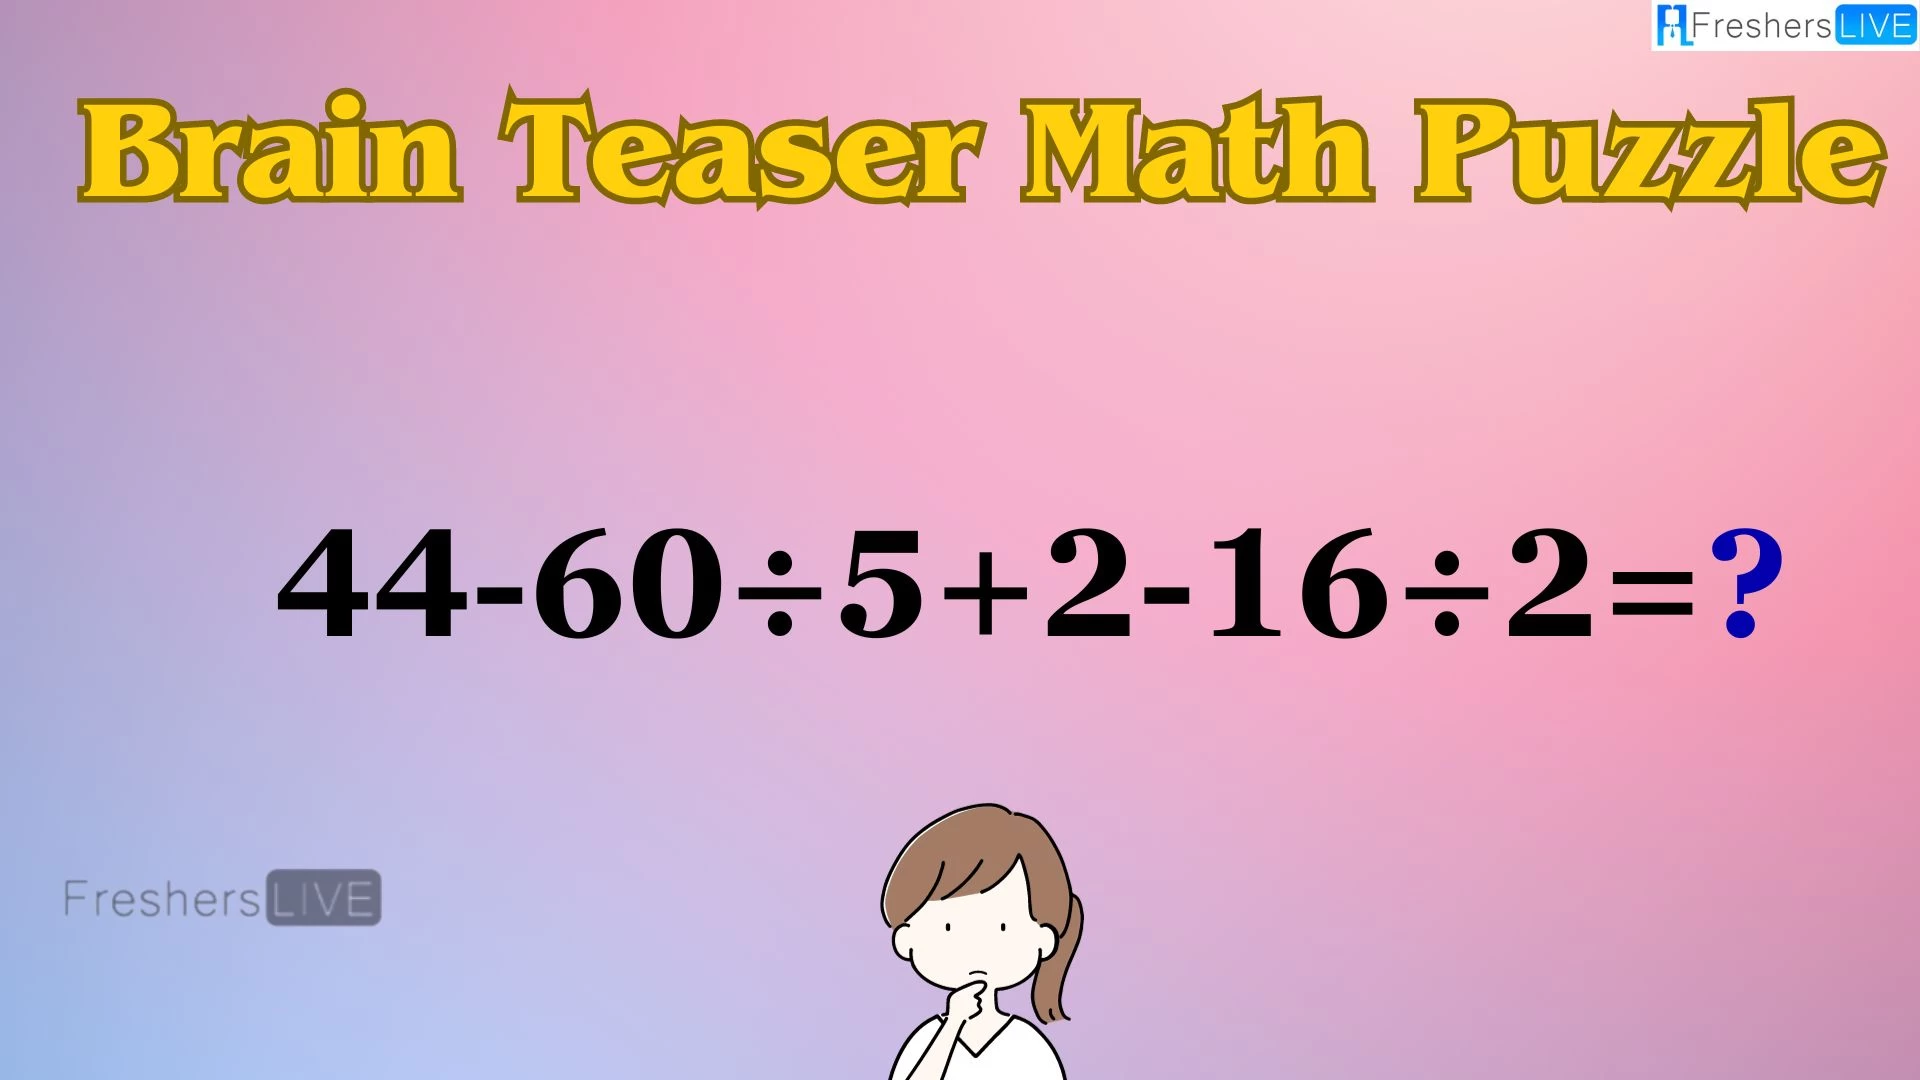 Can You Solve this Math Puzzle? Equate 44-60÷5+2-16÷2=?